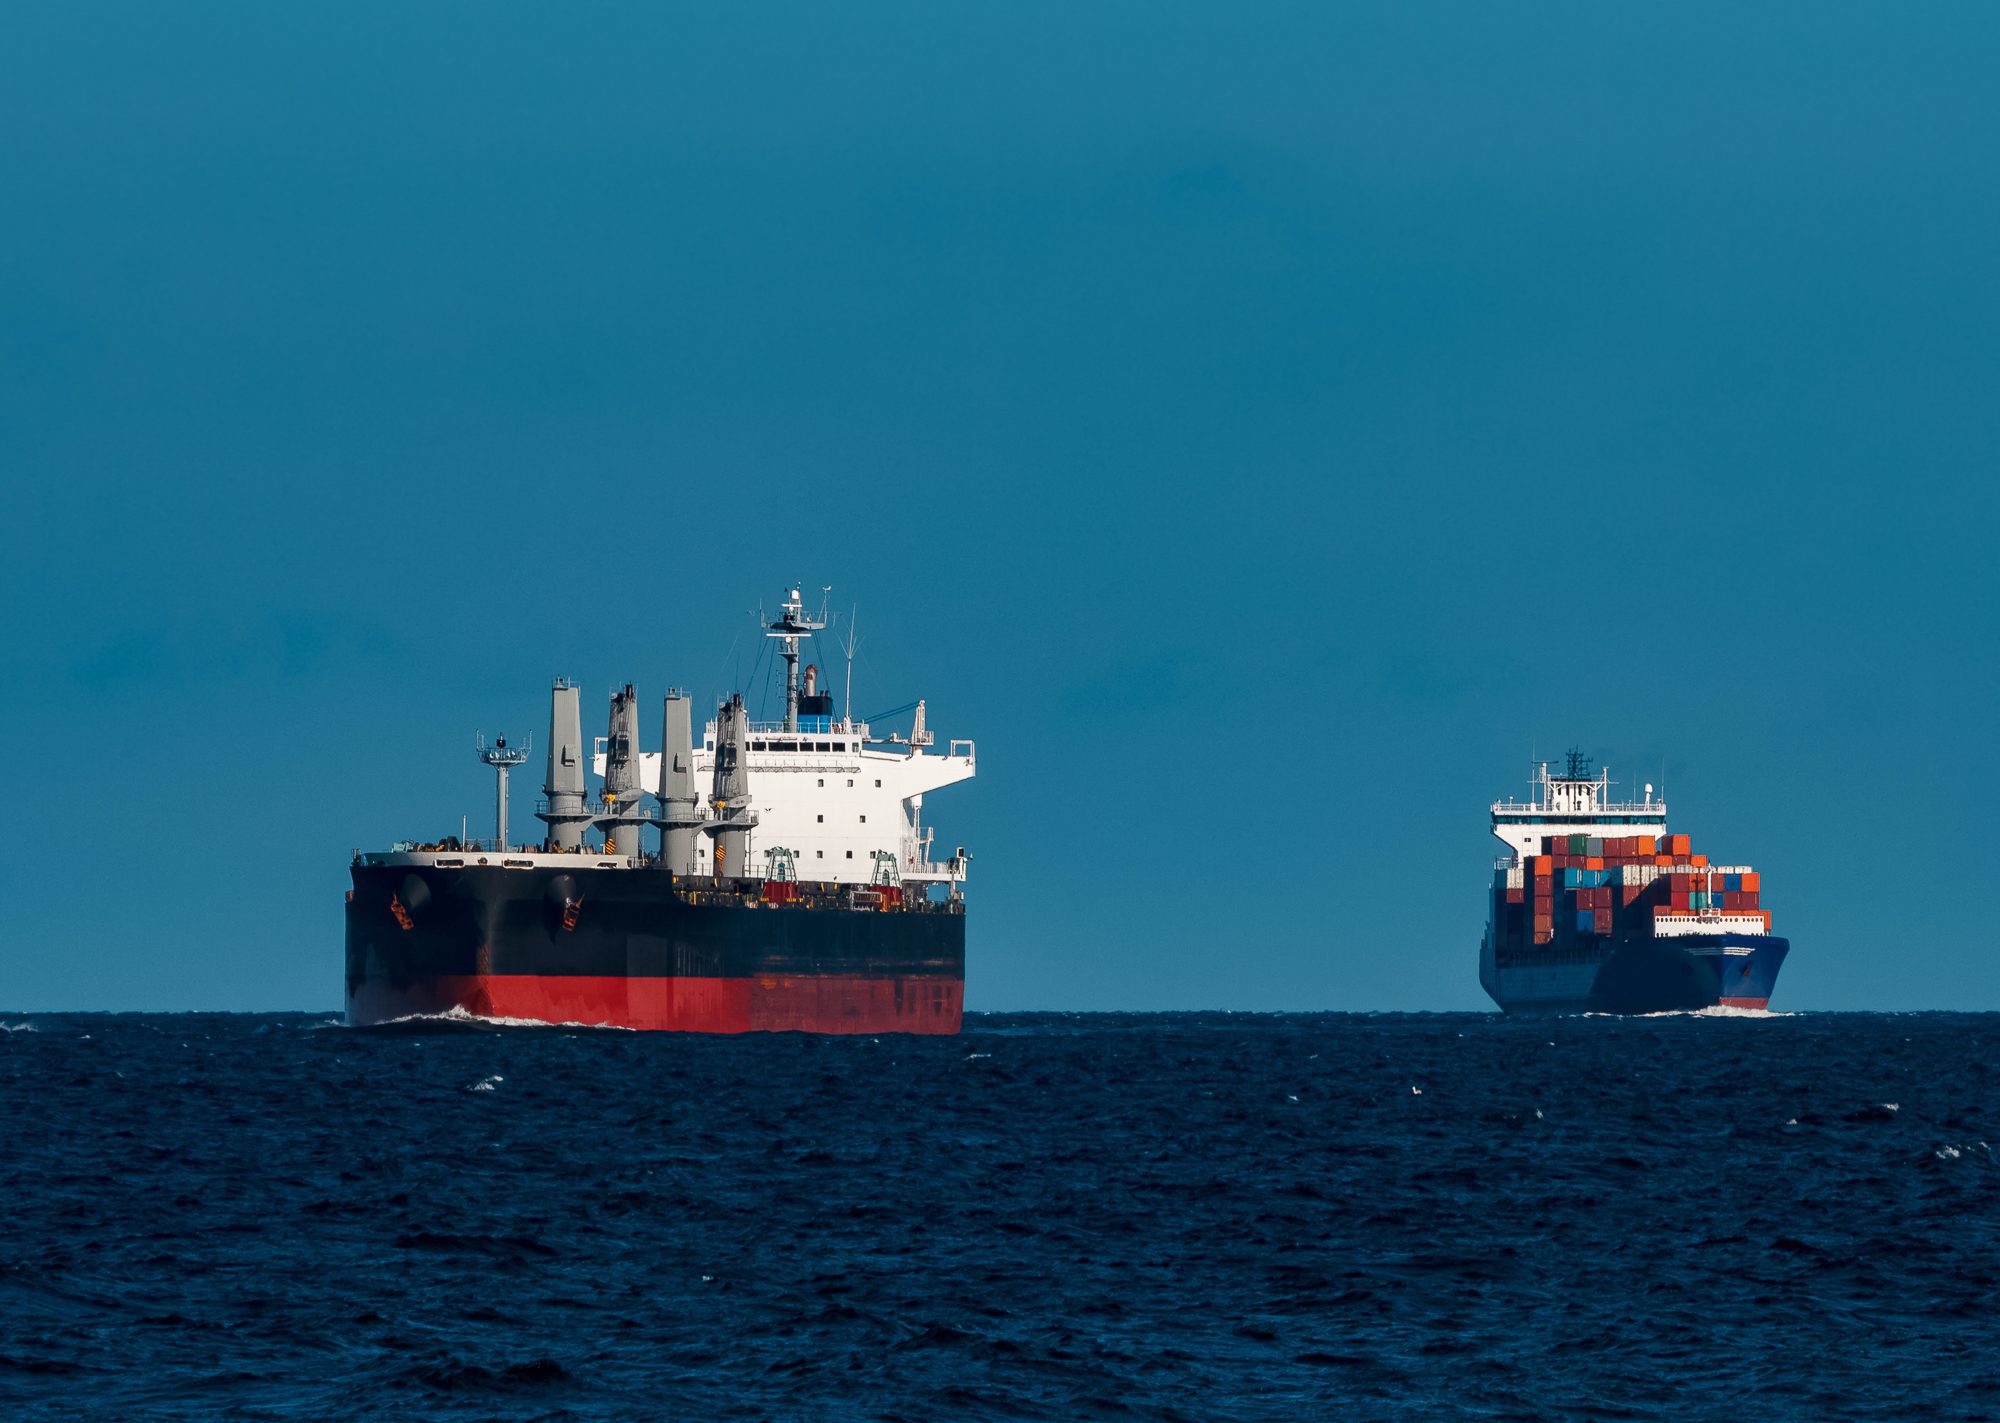 File Photo shows a bulk ship with containership in background